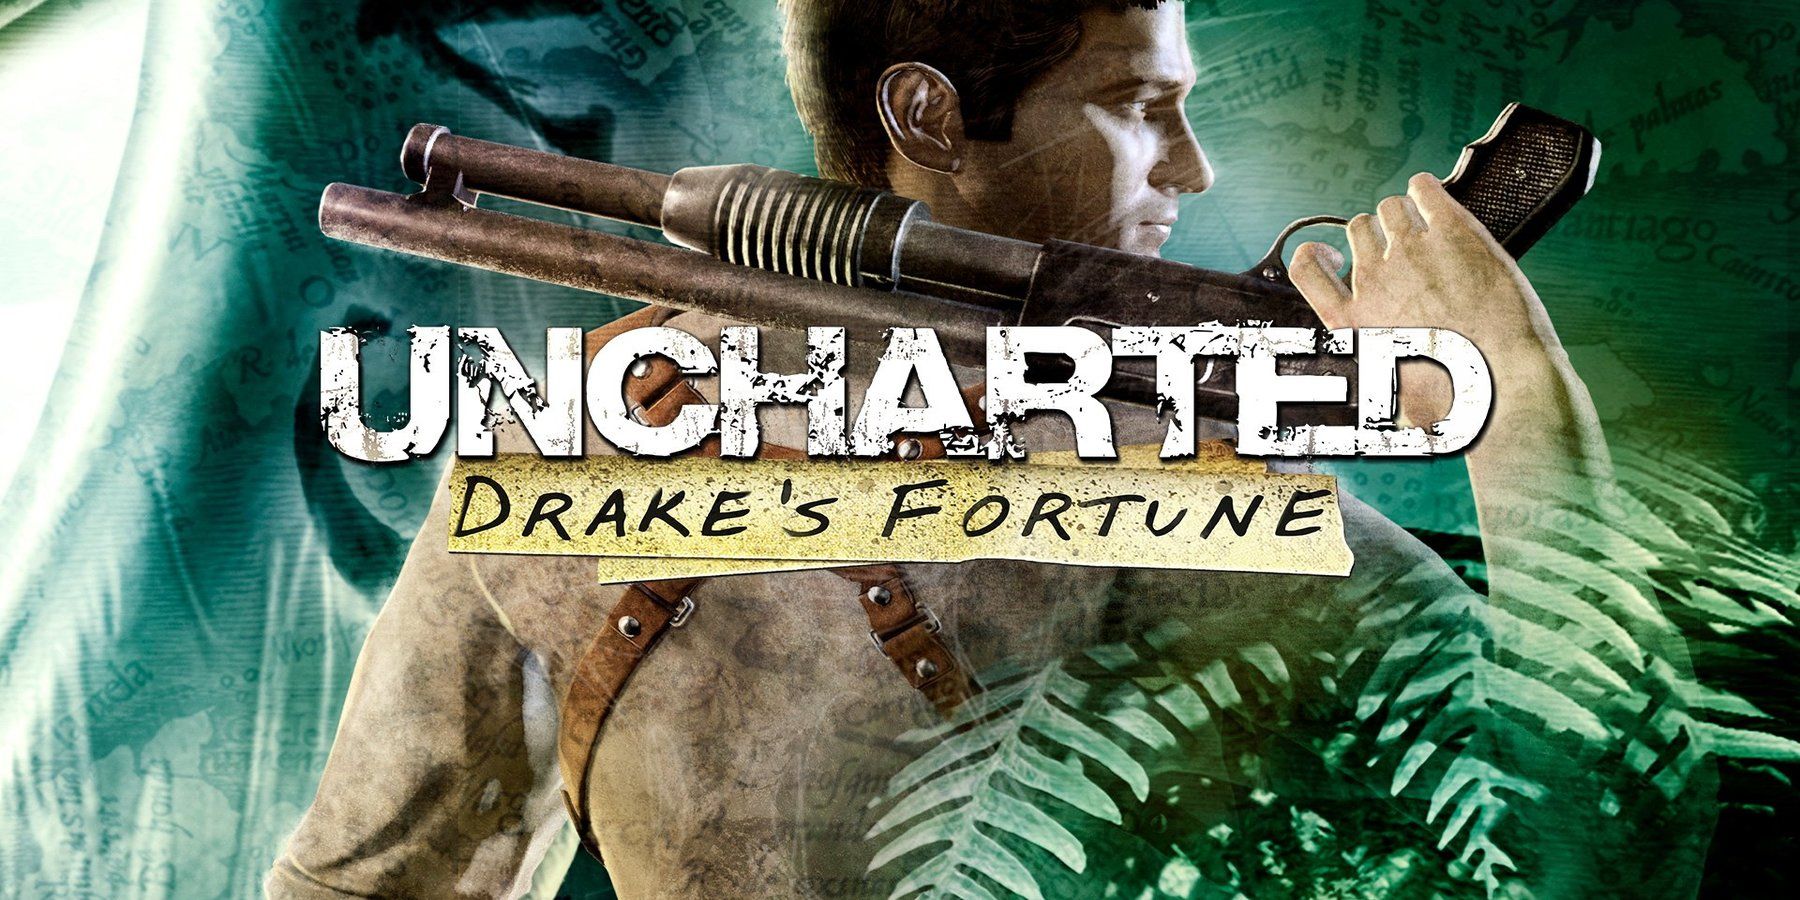 Uncharted-Fortnite crossover brings Nathan Drake to the game this